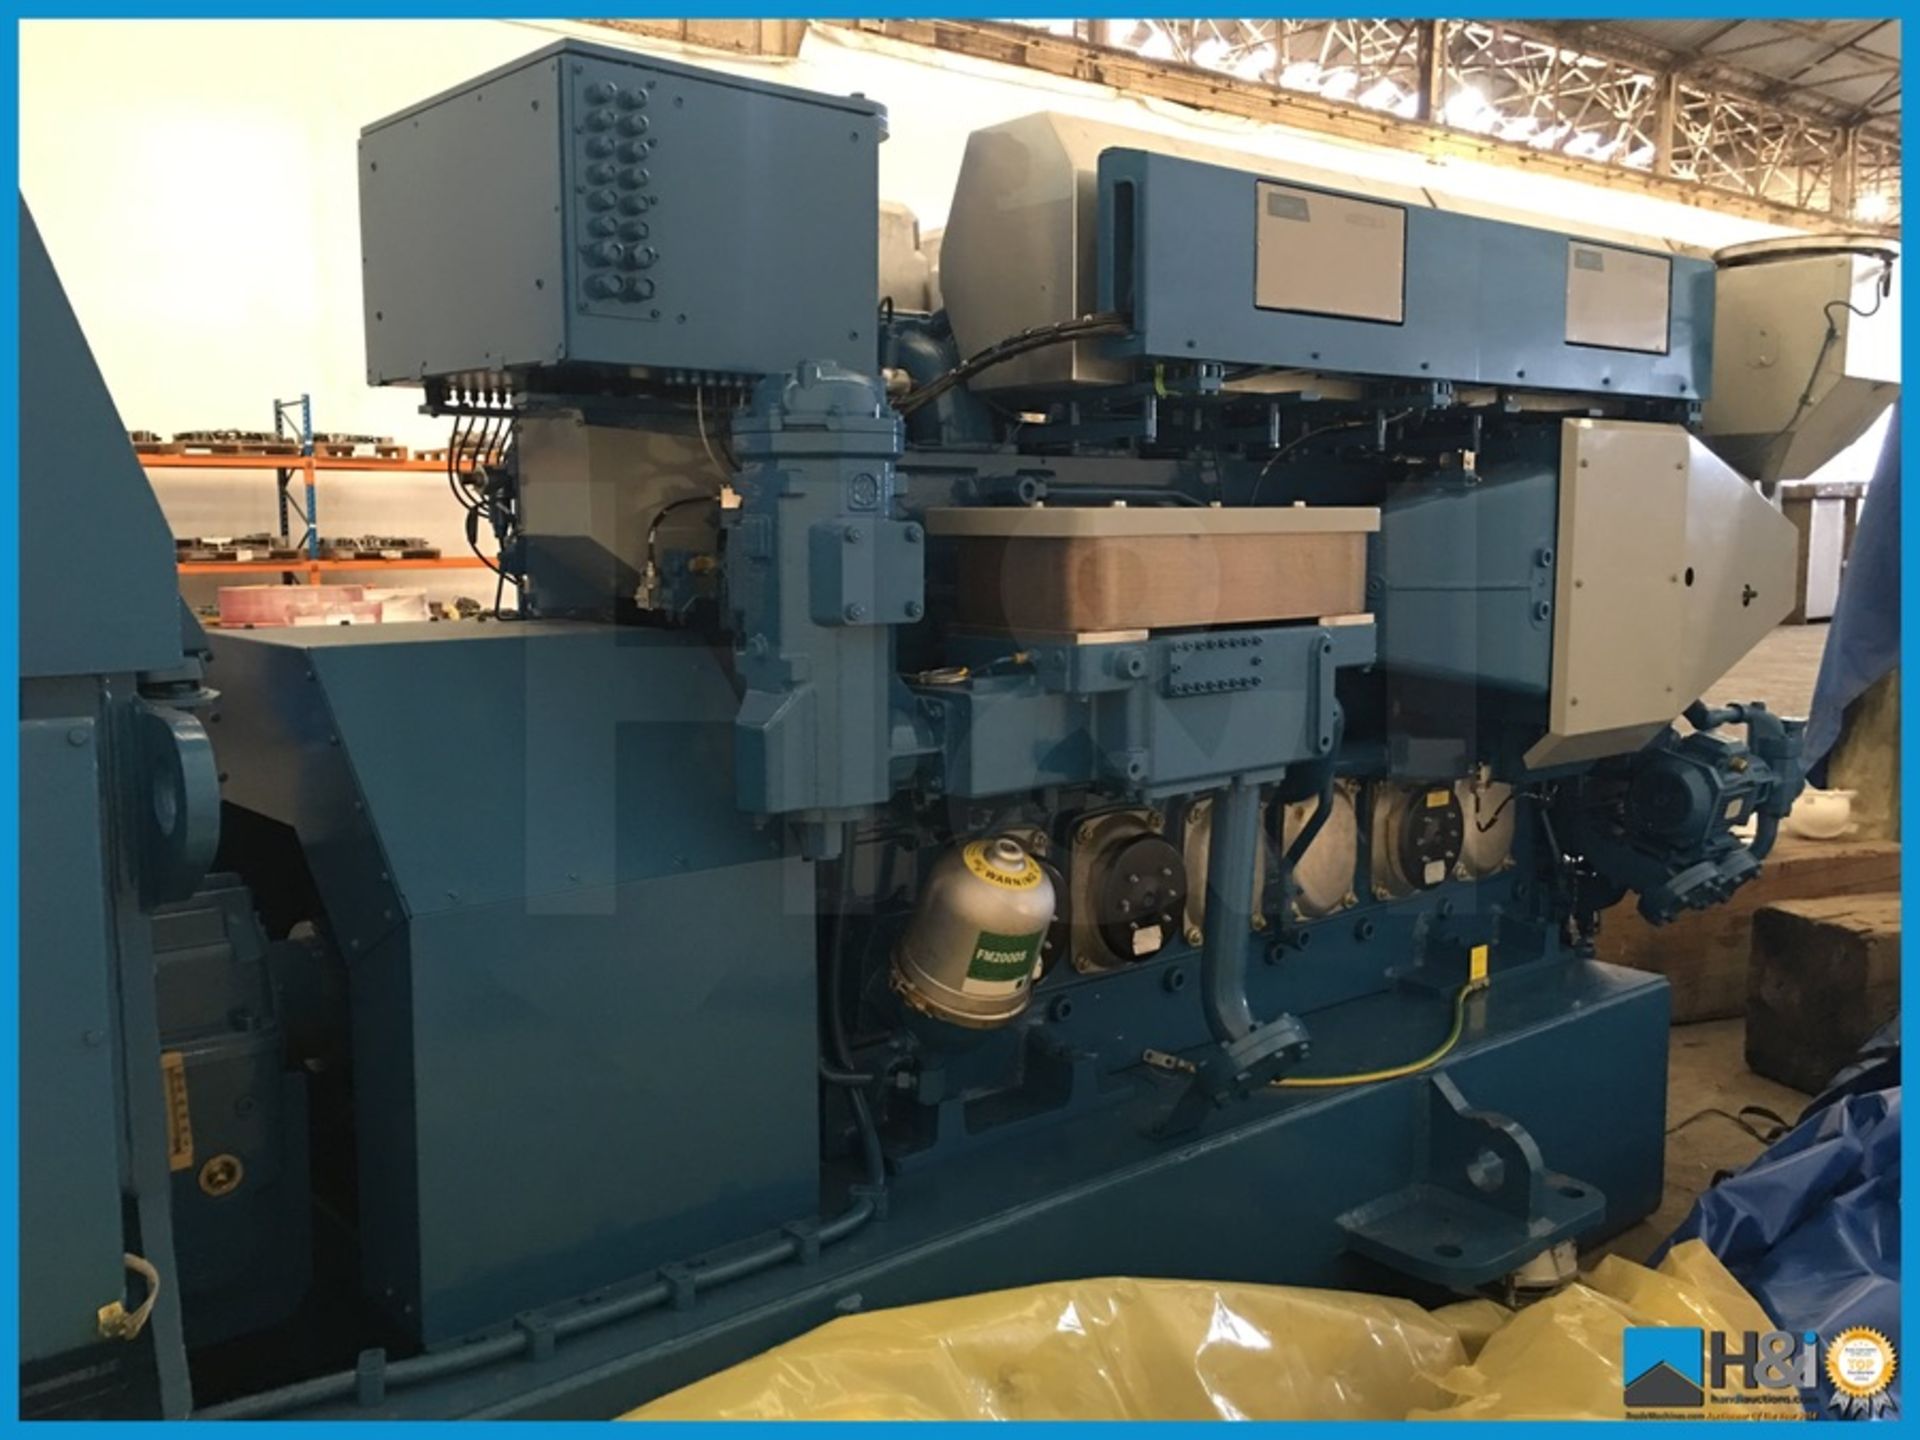 Unused Wartsila 6L20 high capacity diesel generator manufactured in 2013 for a large marine - Image 10 of 22